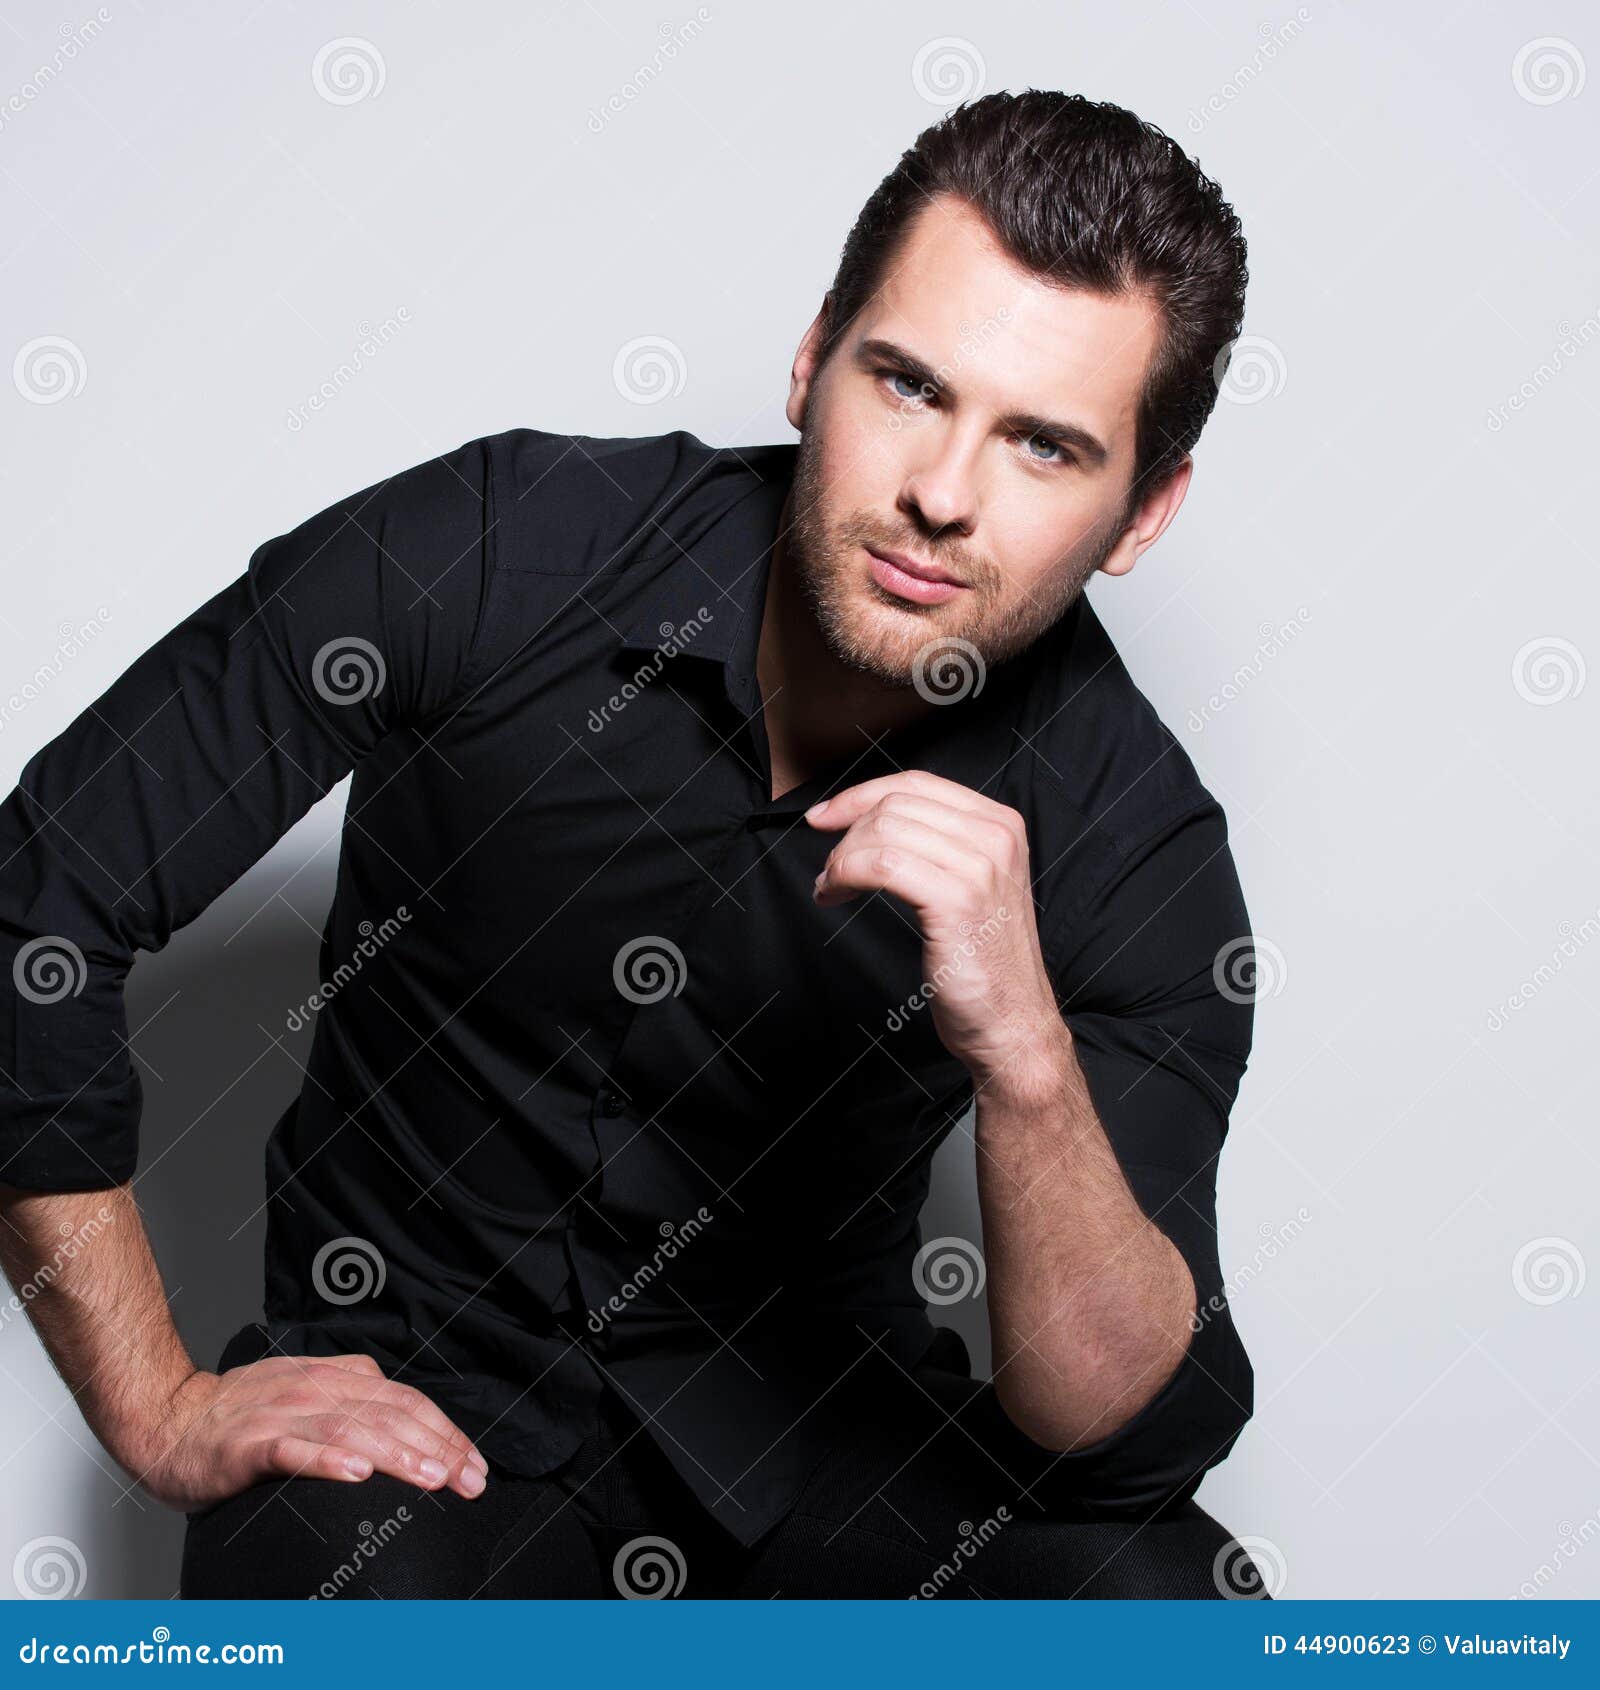 Men's beauty, fashion. full length portrait of a handsome male model posing  in stylish clothes. studio shot. | CanStock